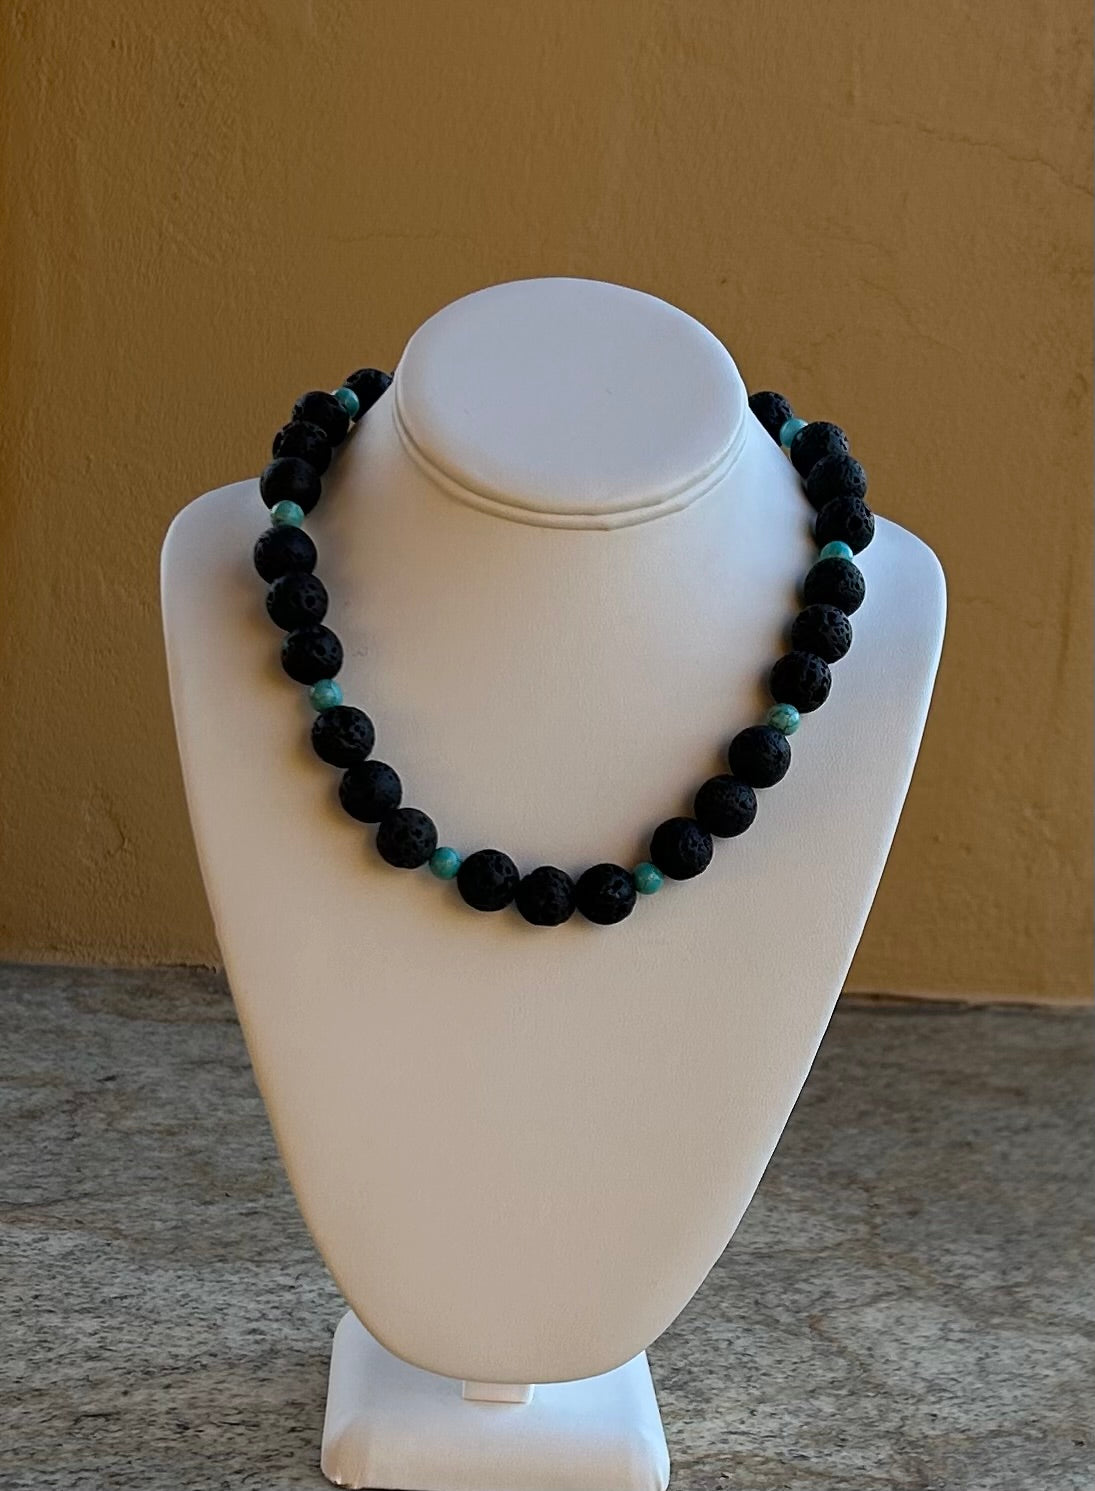 Necklace - Chunky black lava stone with turquoise beads